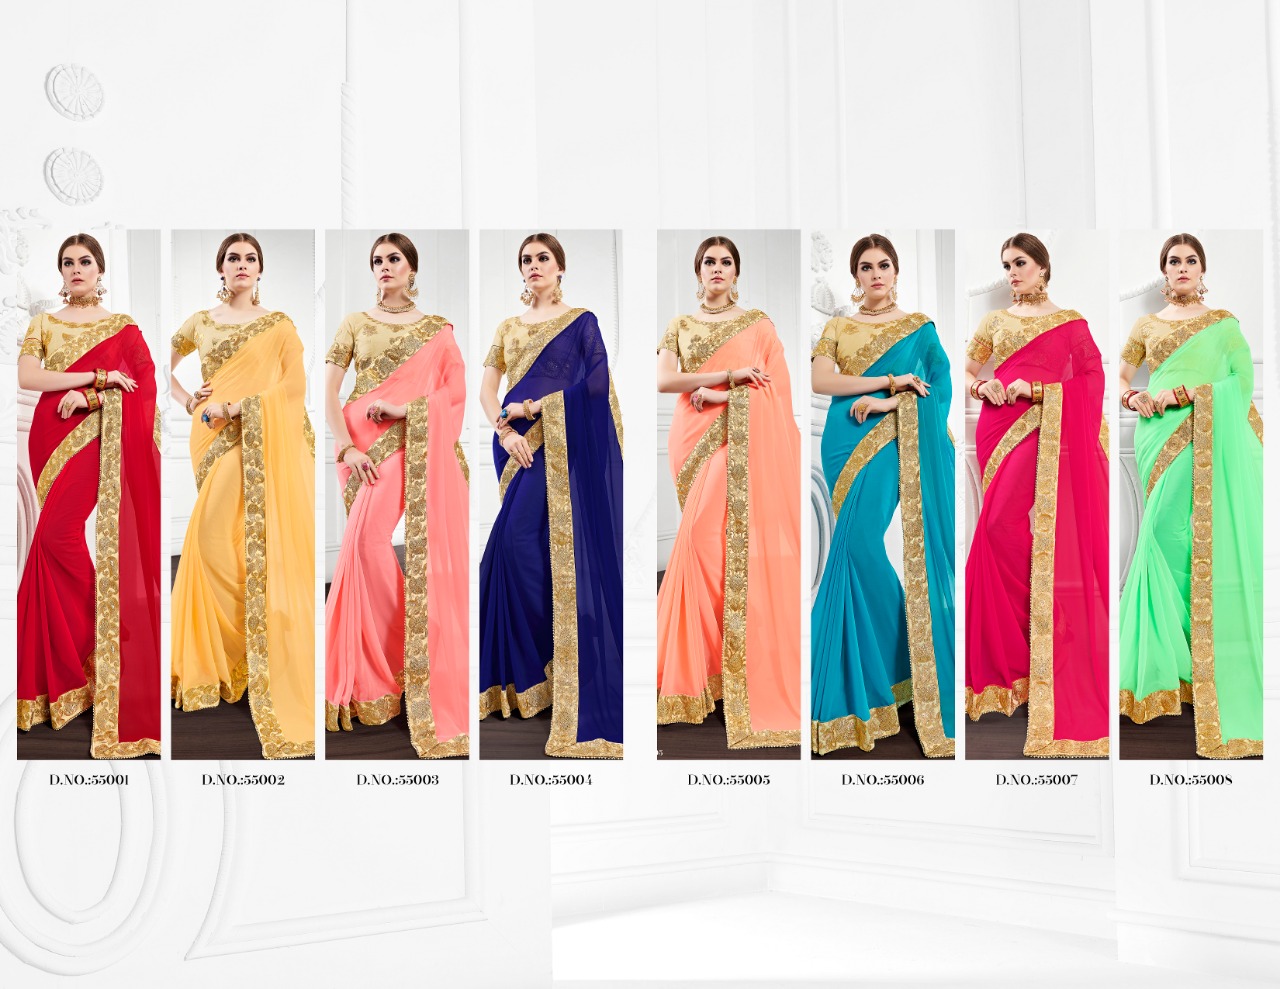 Saroj presenting indian fashion 2 beautiful Heavy party wear collection of sarees